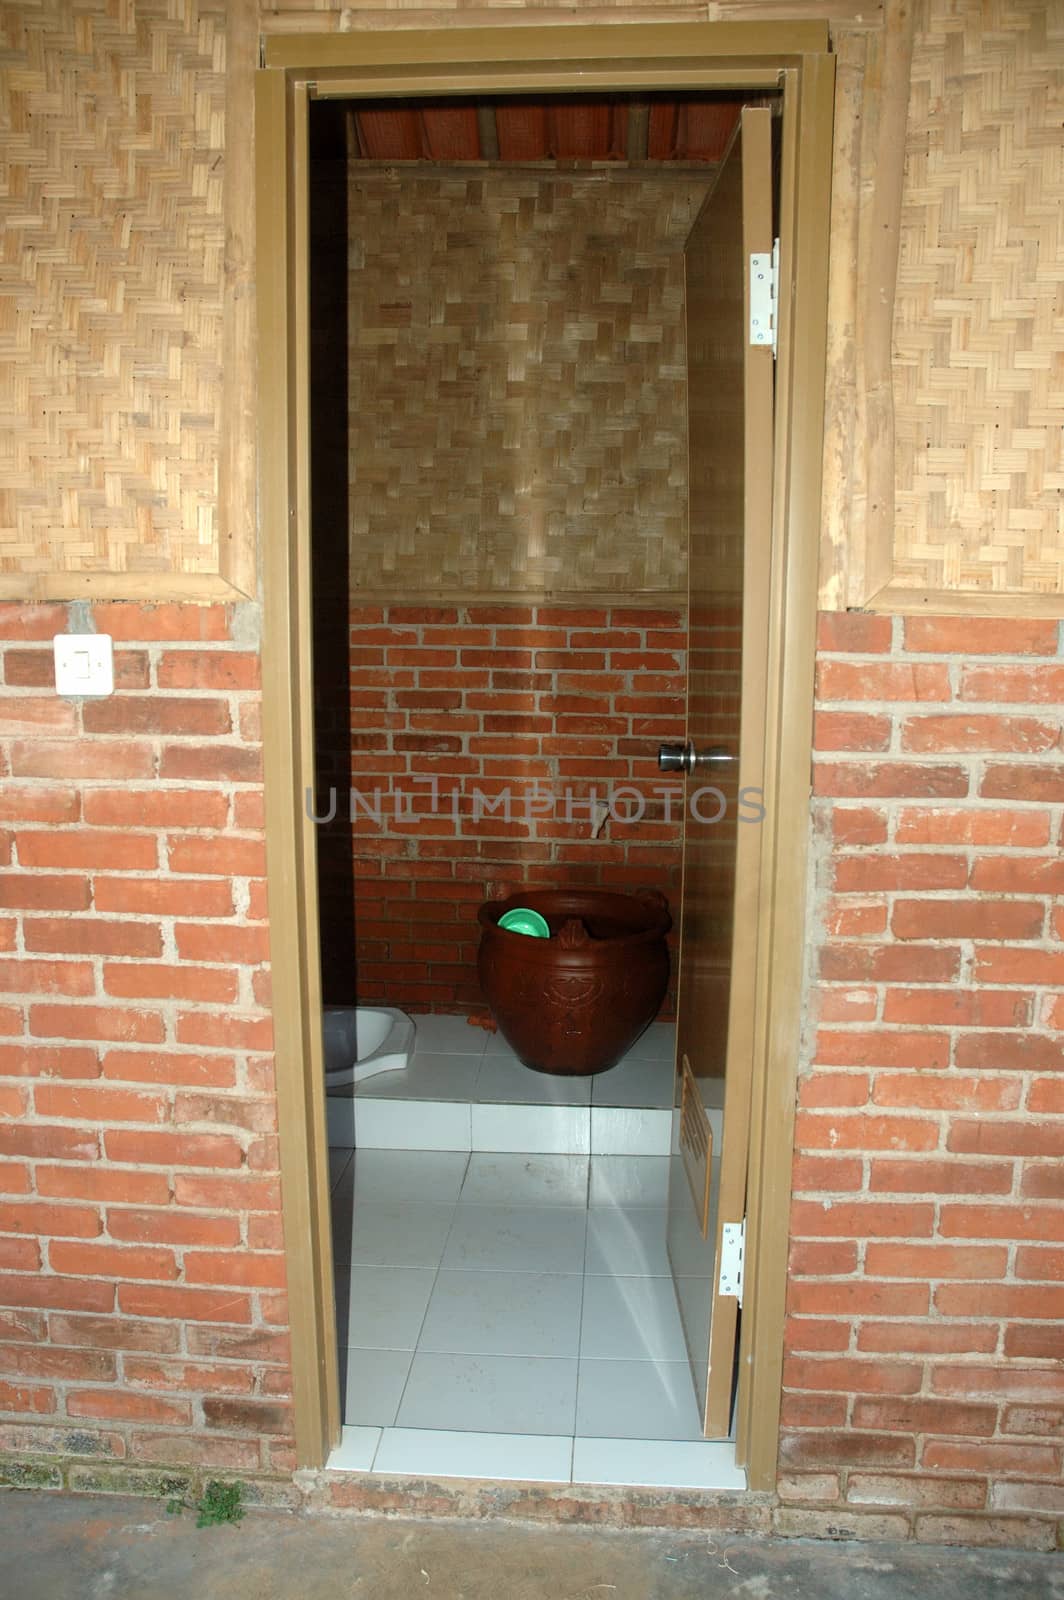 outdoor toilet that found in the middle of cottage area